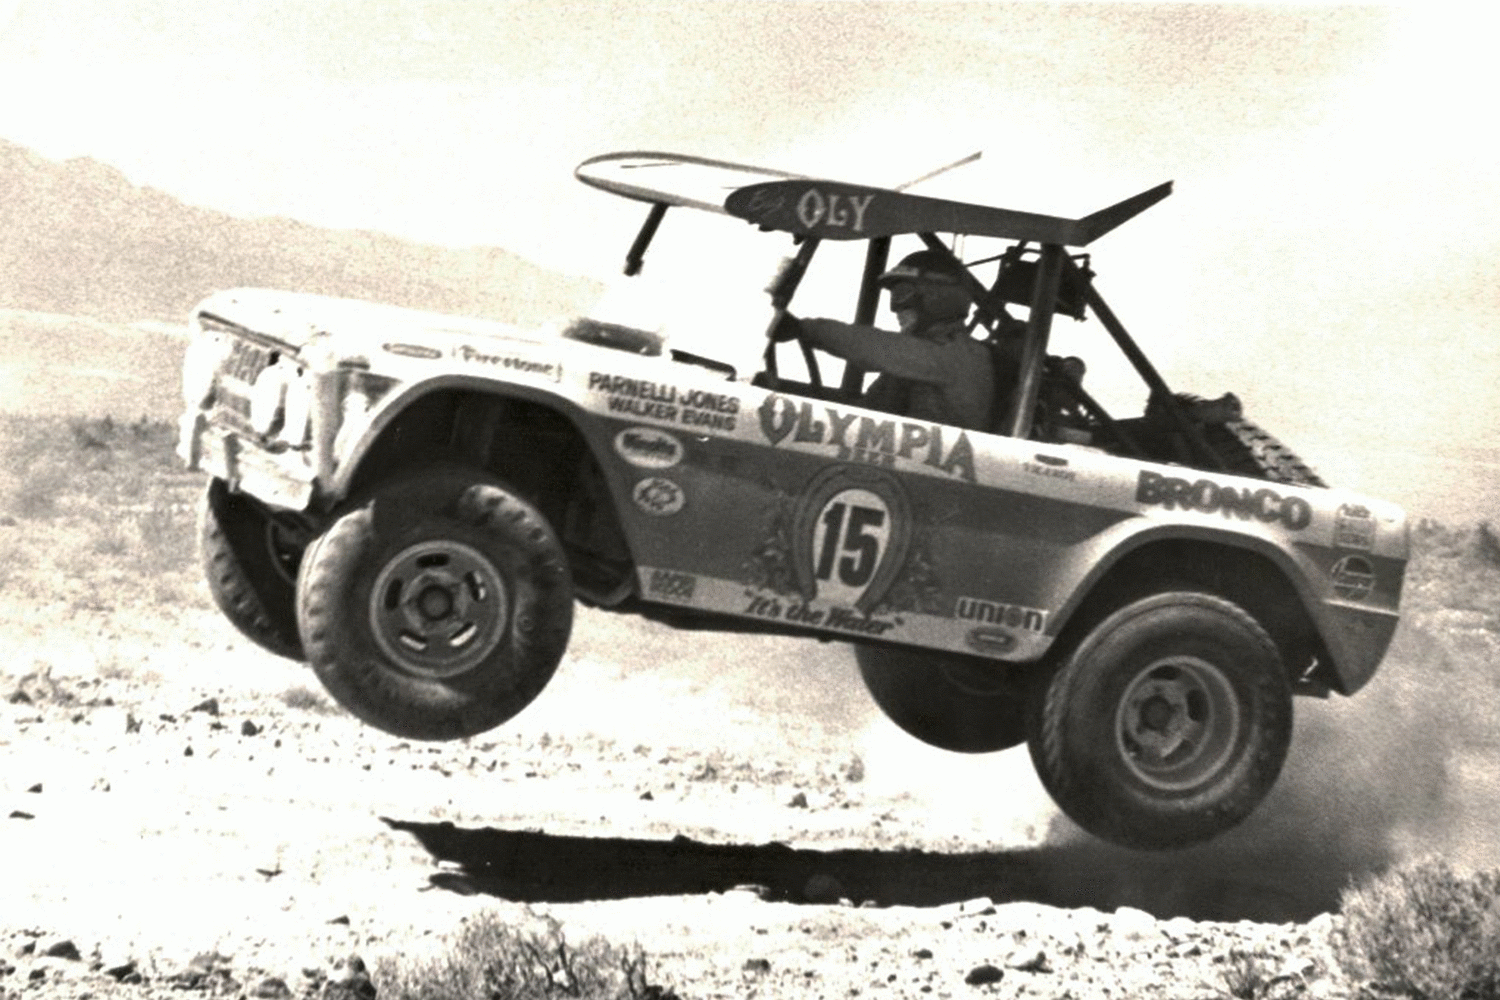 Parnelli Jones jumping his Big Oly Ford Bronco in the dirt